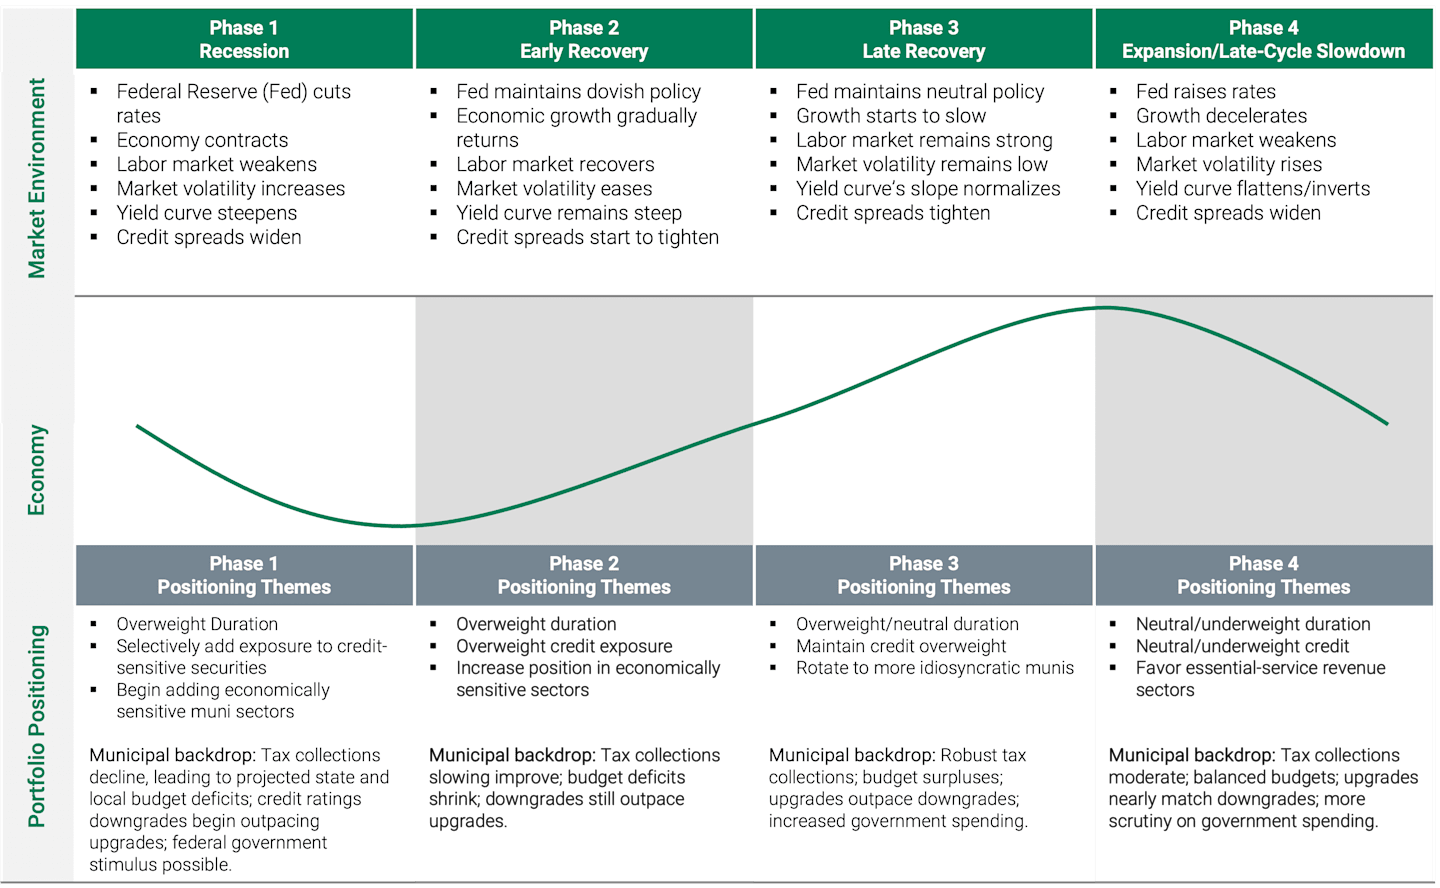 Diagram showing American Century's muni portfolio positioning throughout the four phases of the economic cycle.